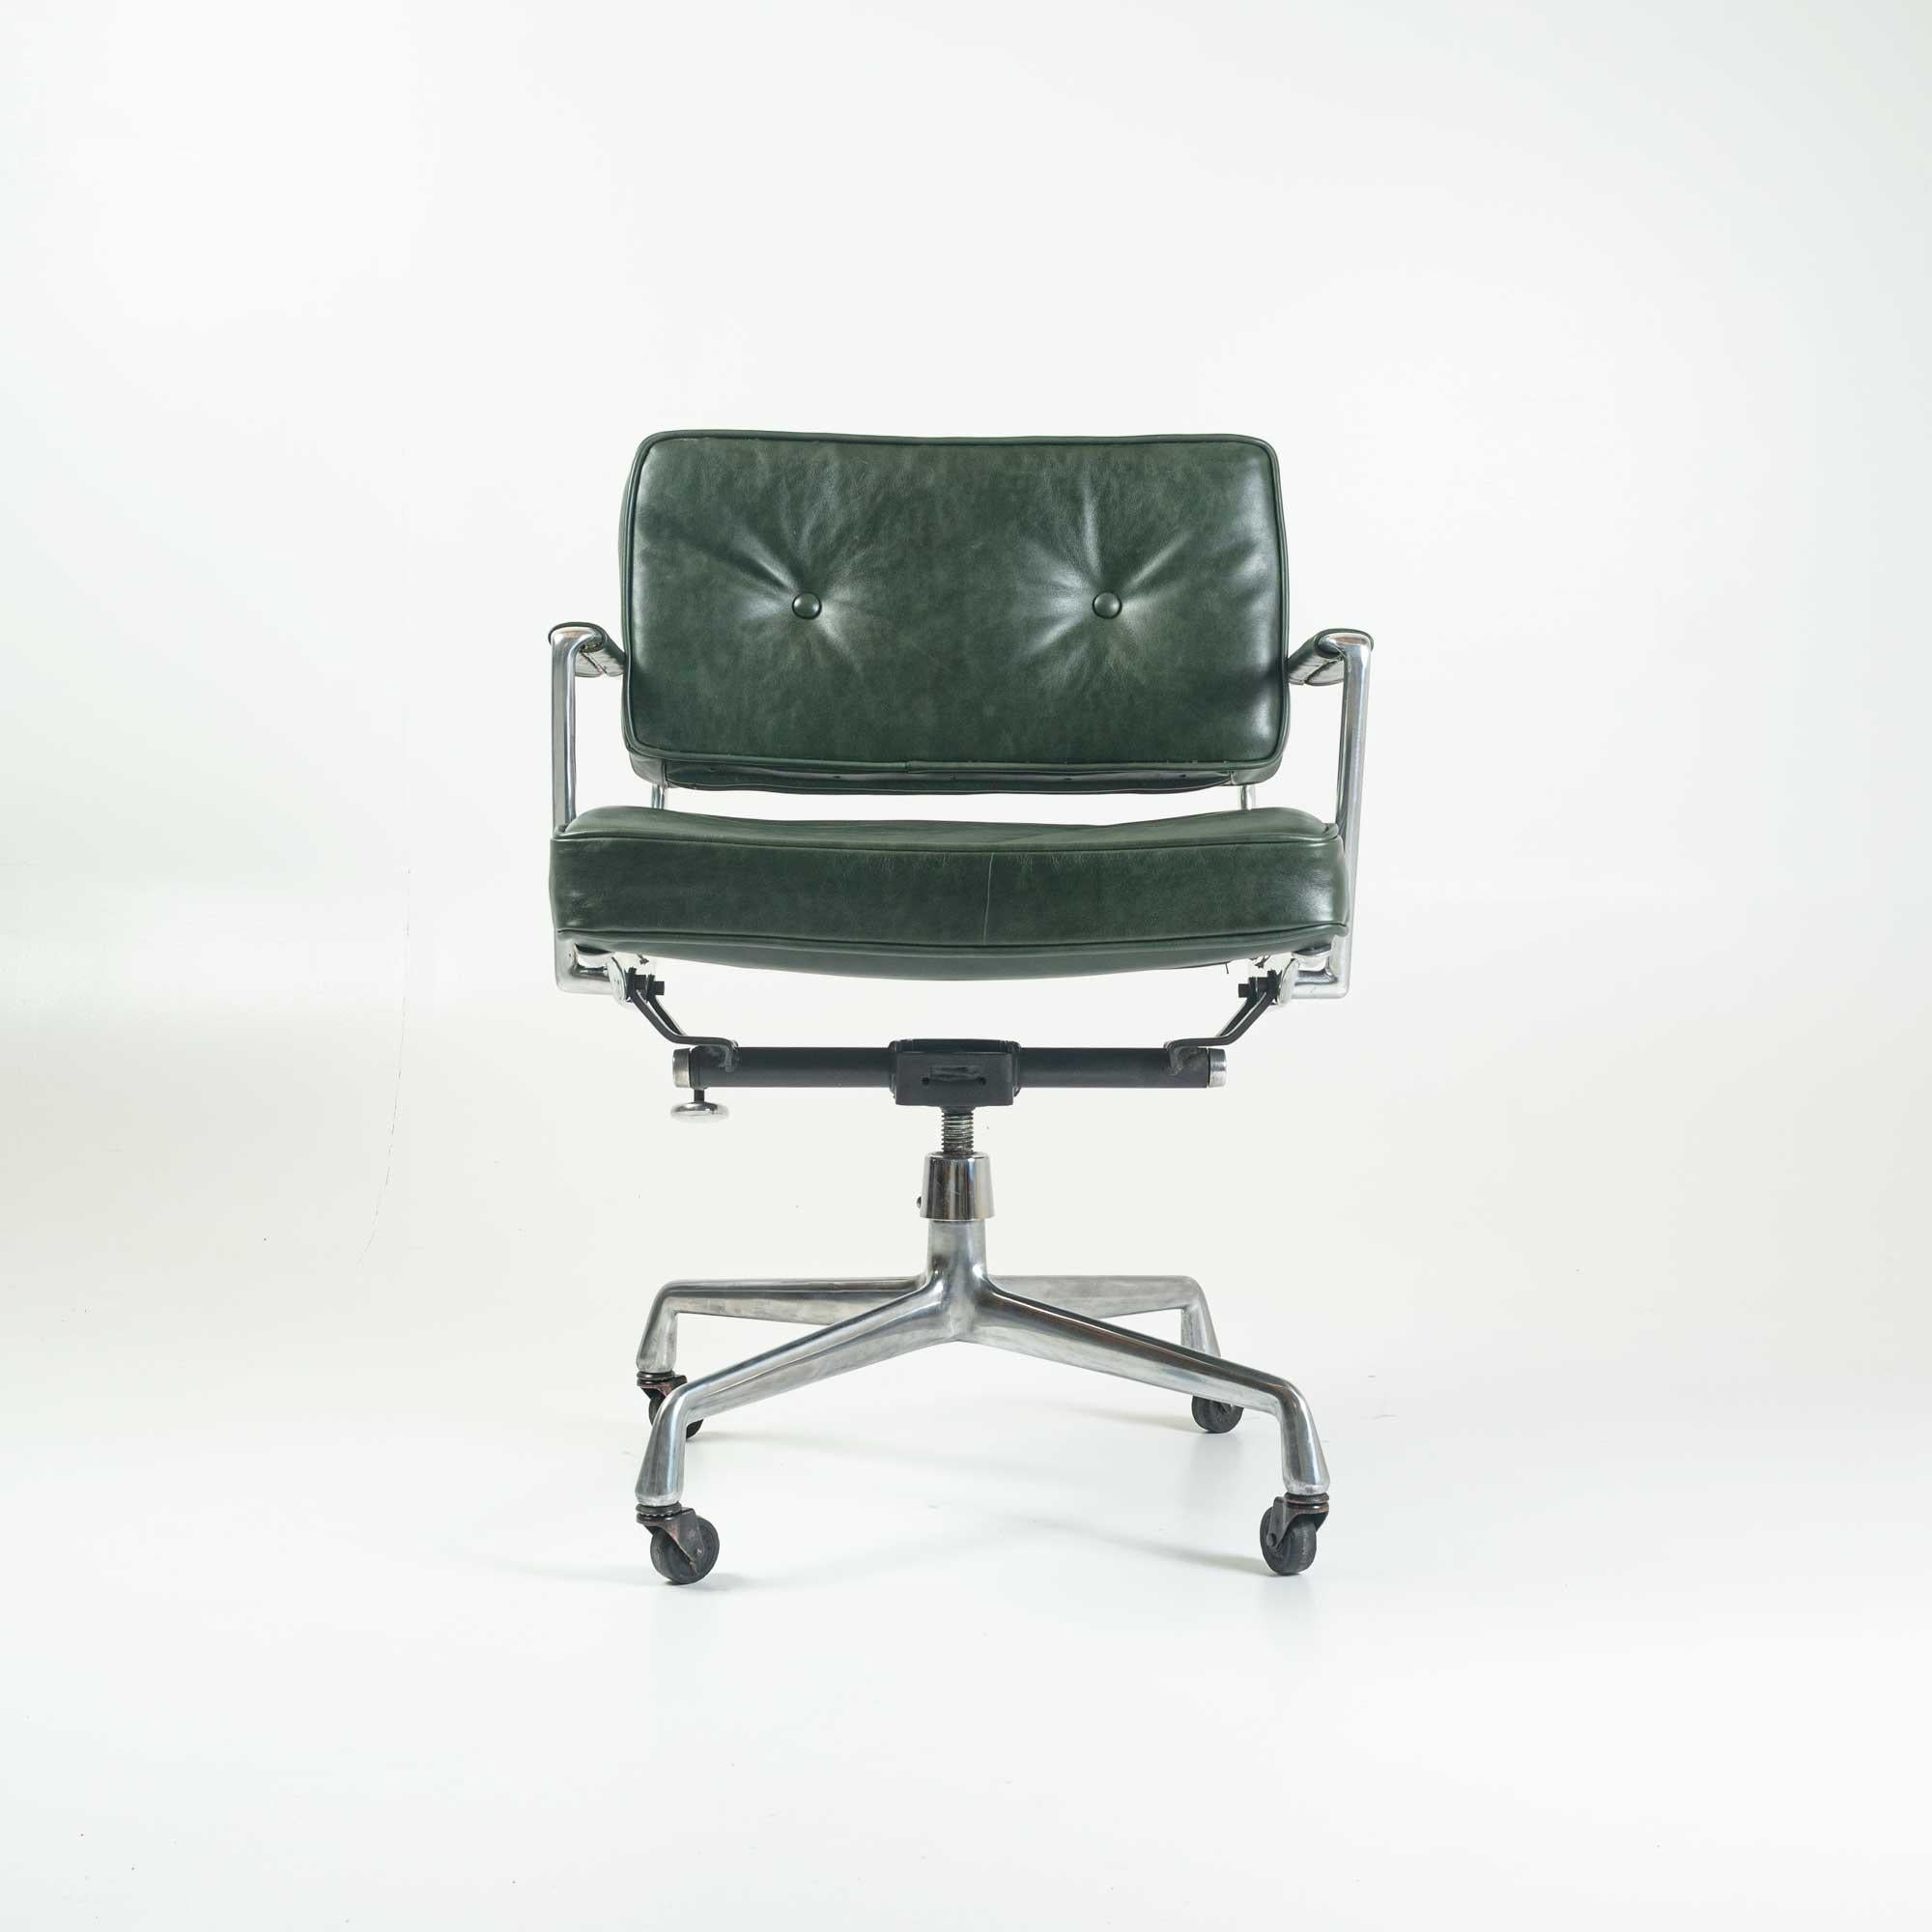 Eames Intermediate chair with arms version, early model, reupholstered in British racing green leather.
    